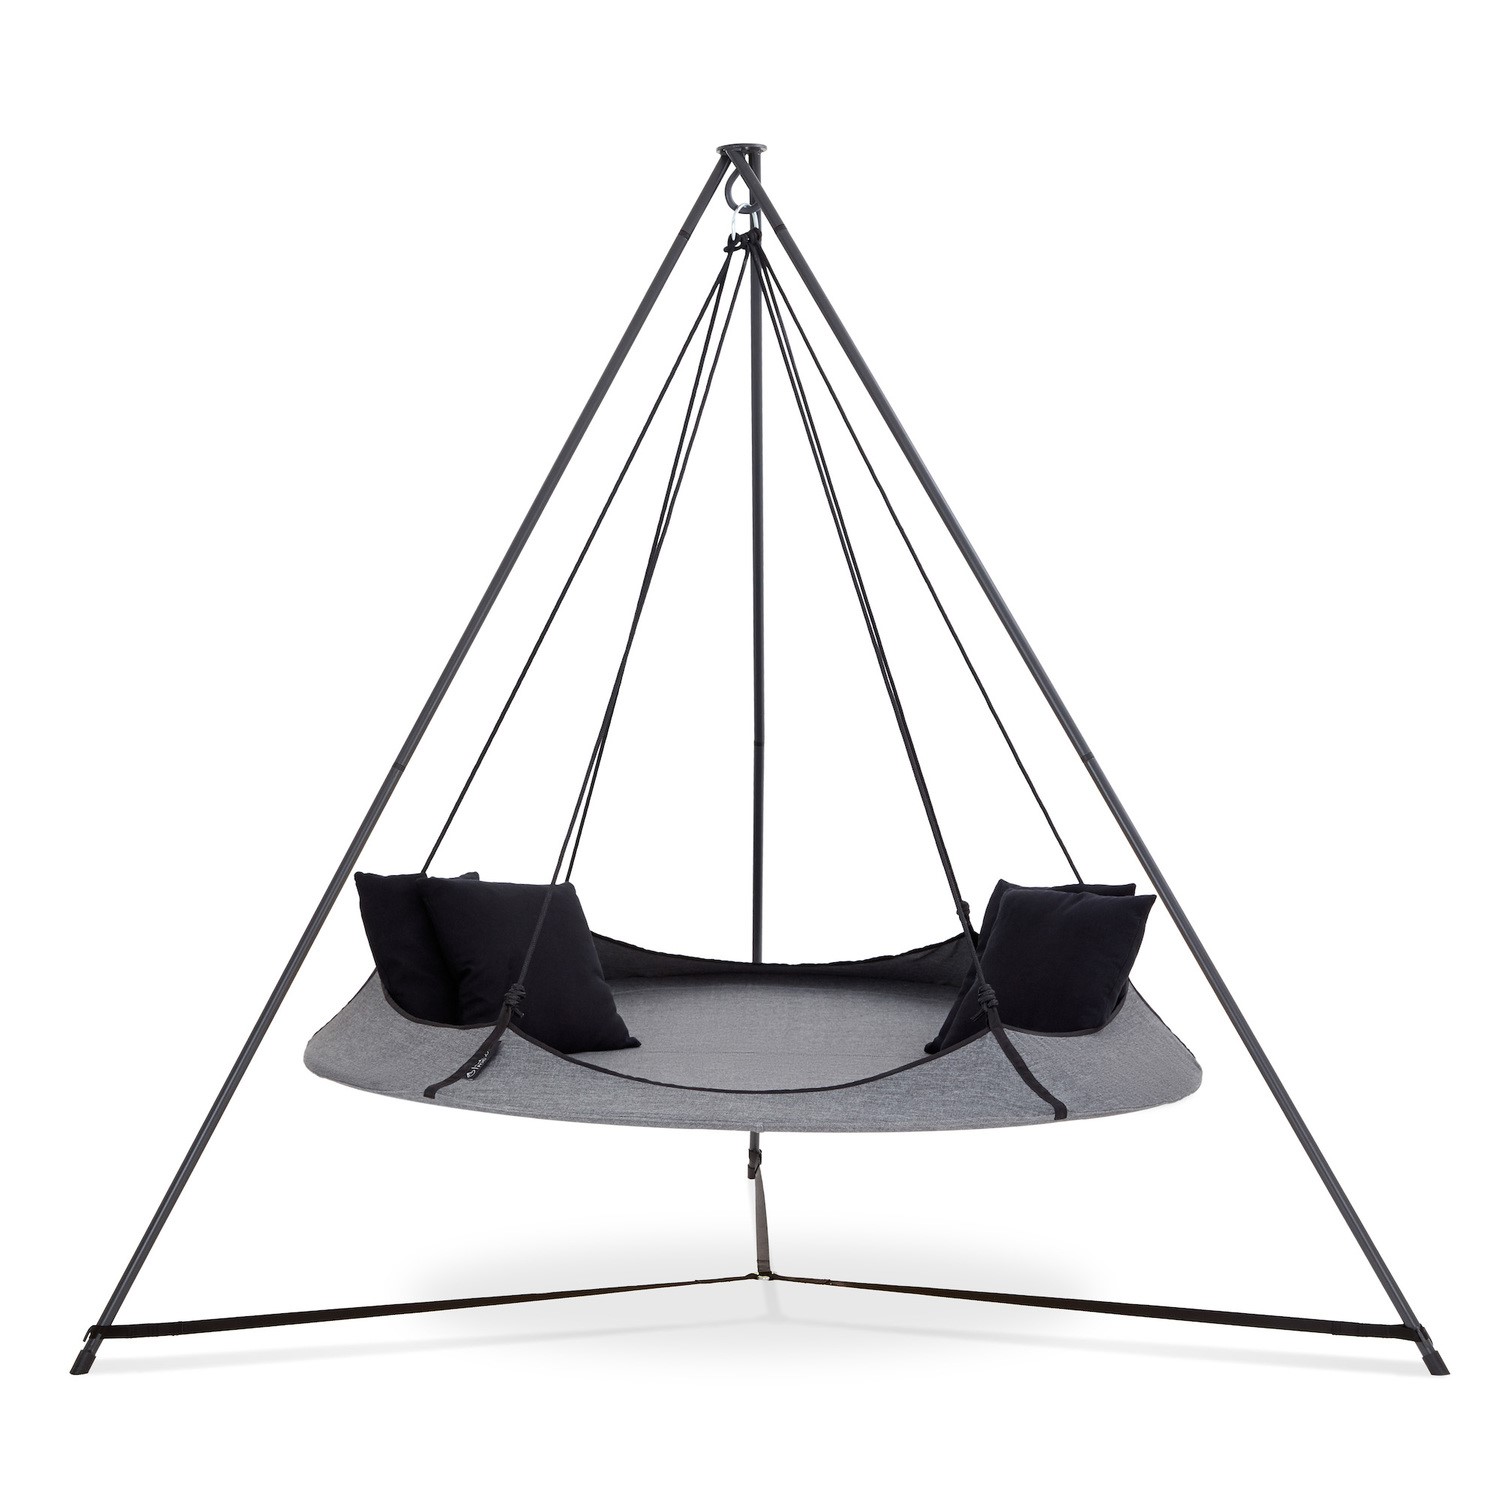 Read more about Hangout pod grey & black circular hammock bed with stand